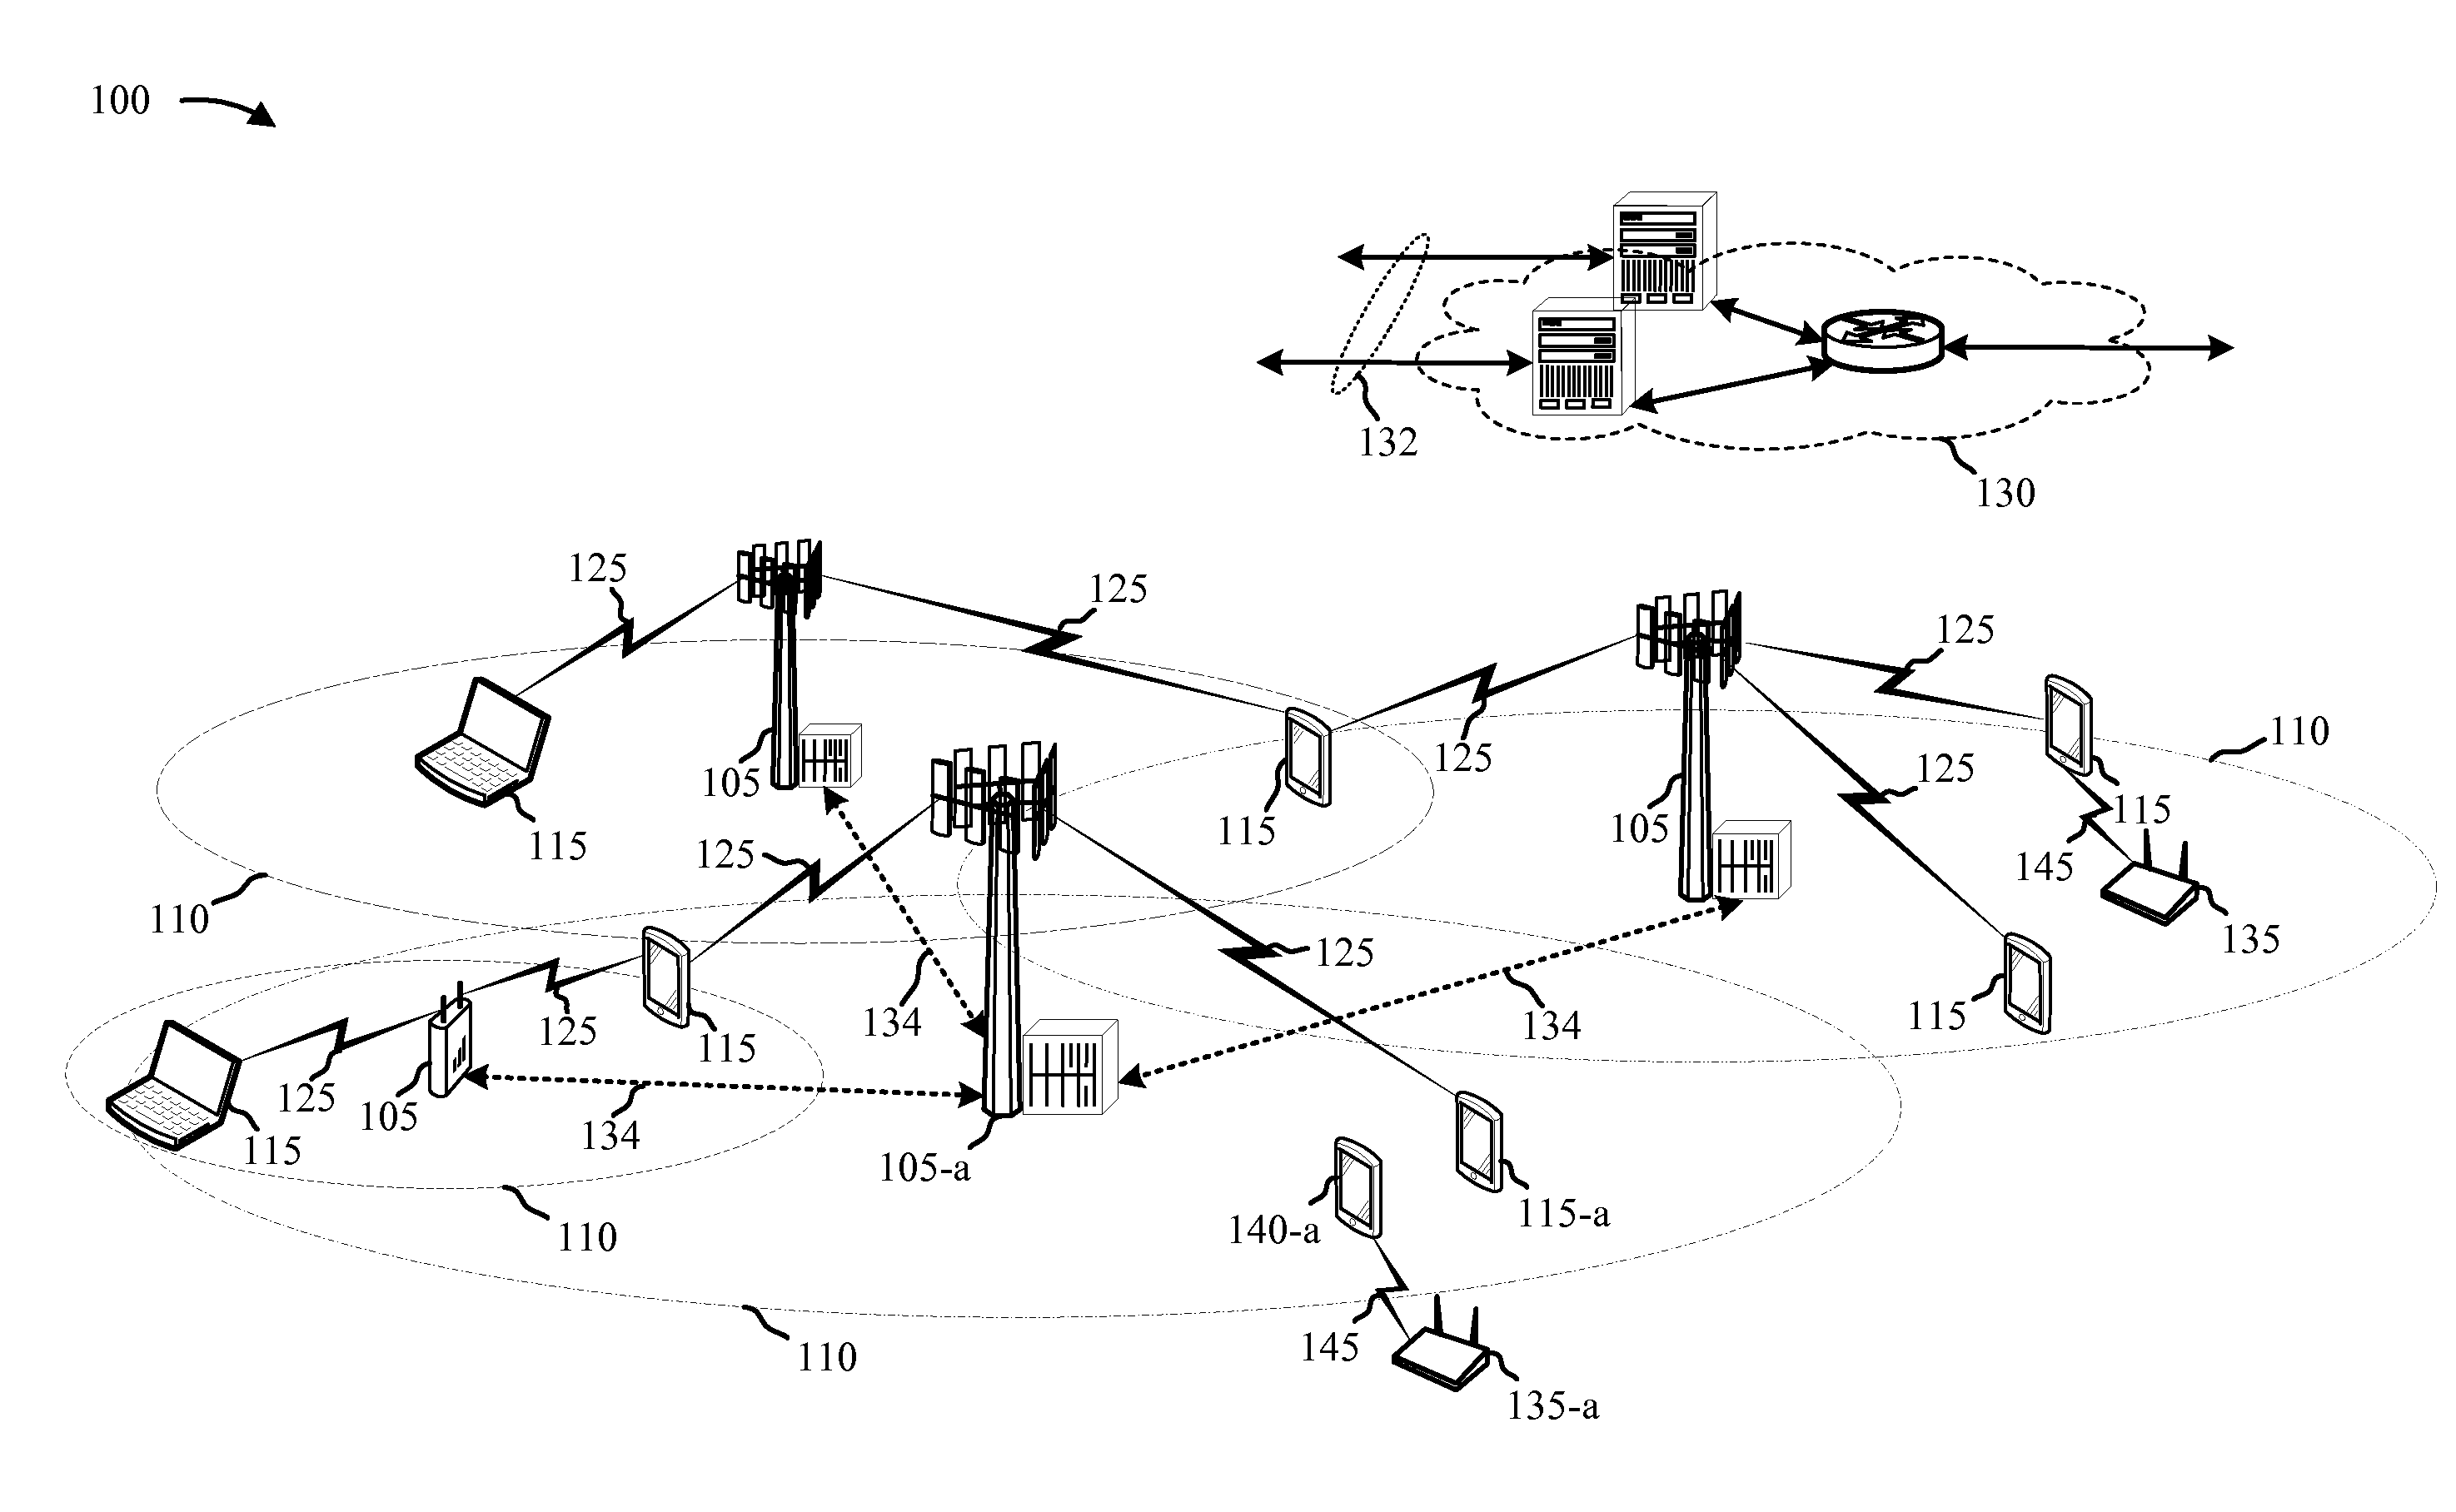 Techniques for transmitting preambles over an unlicensed radio frequency spectrum band